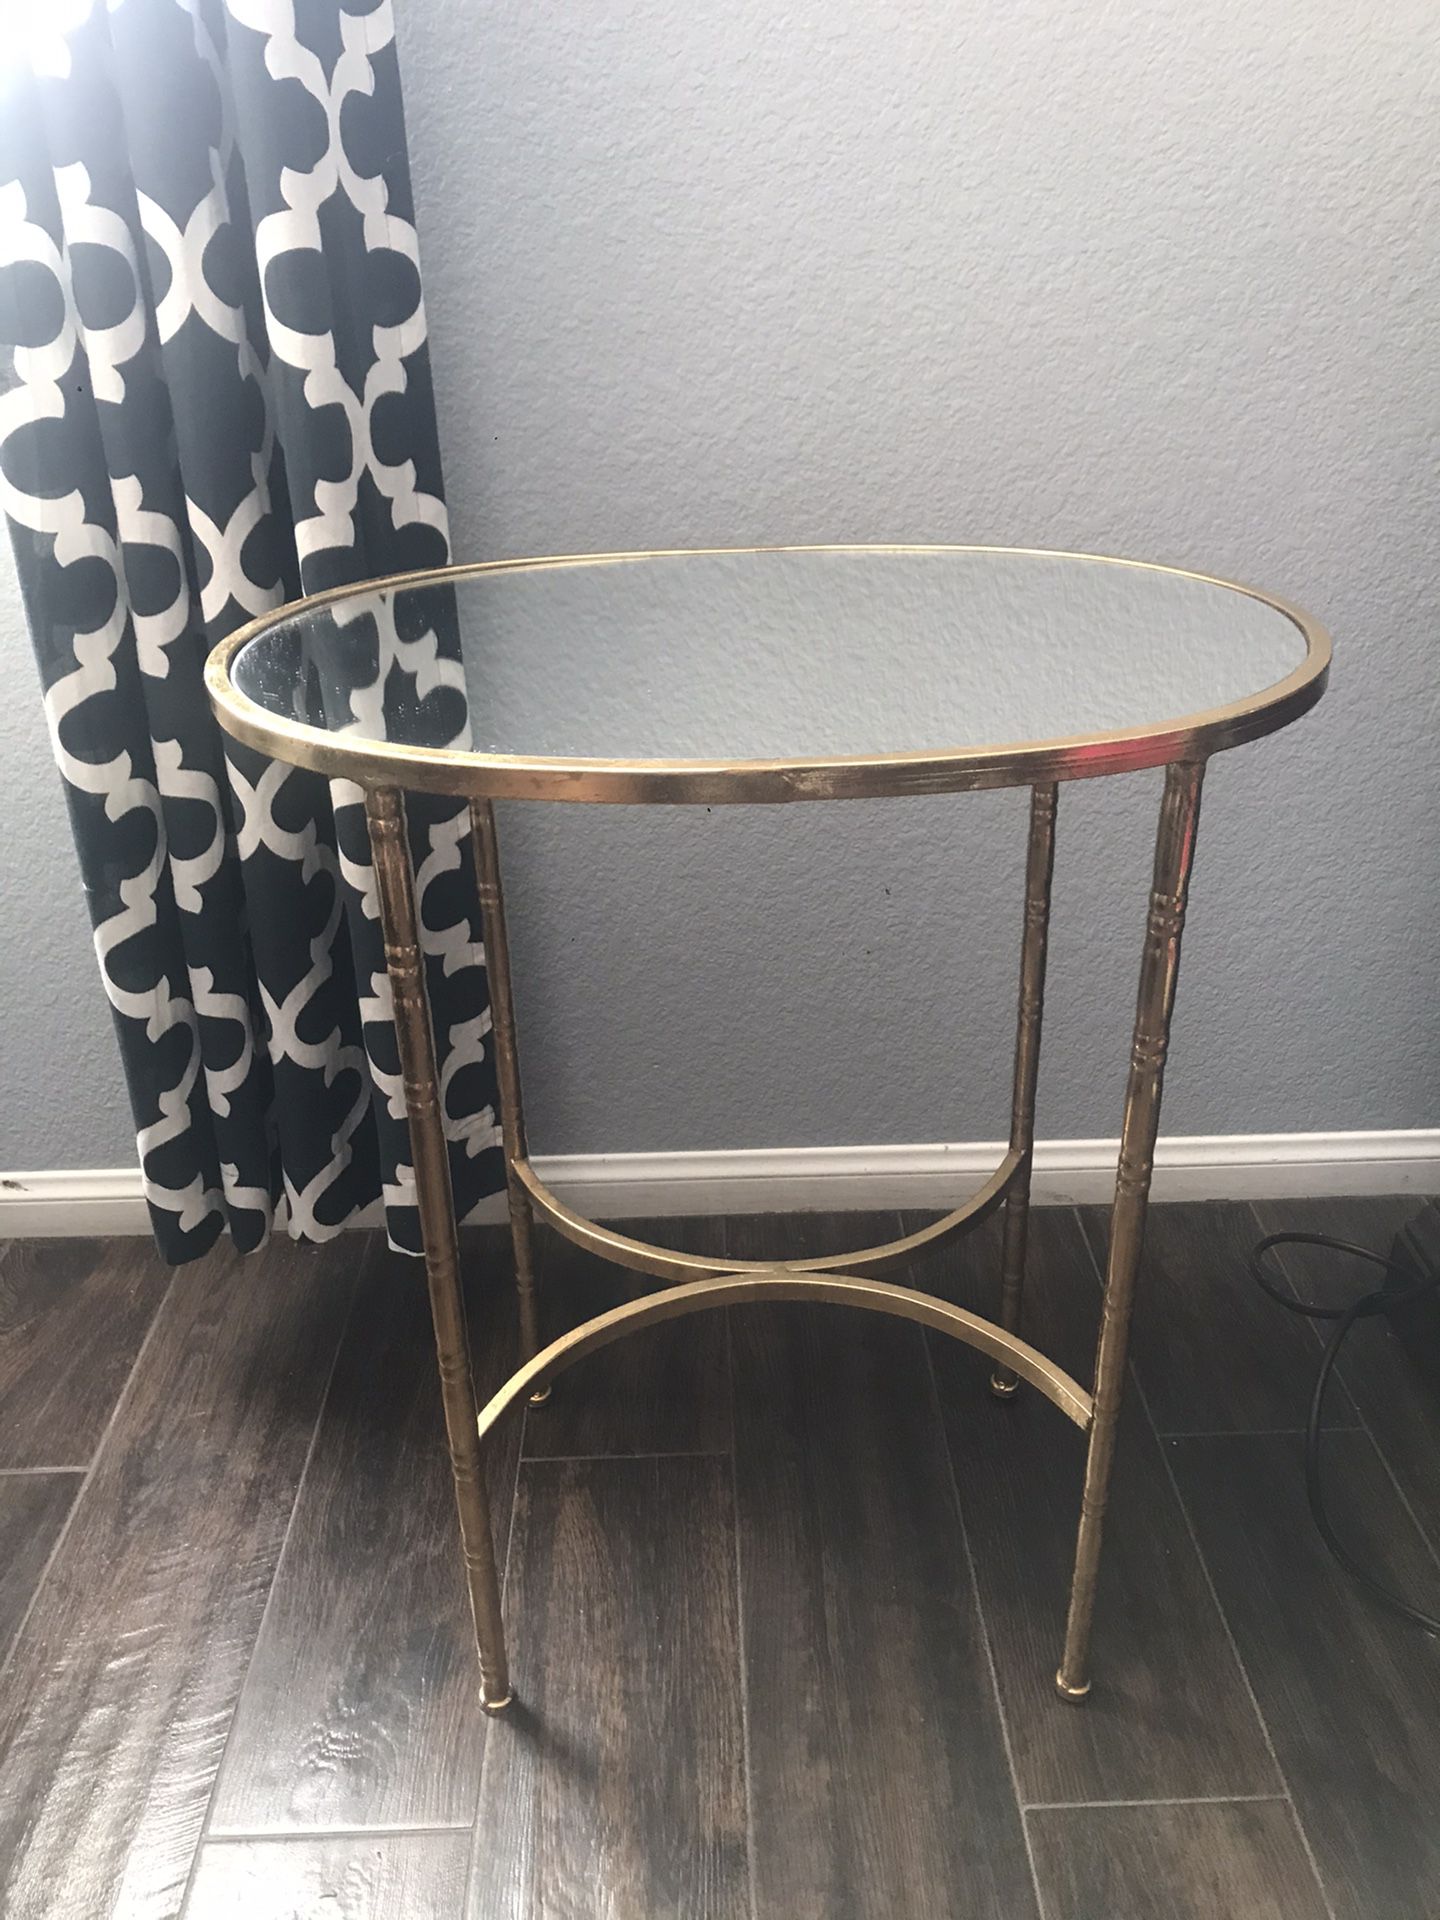 Gold mirror table